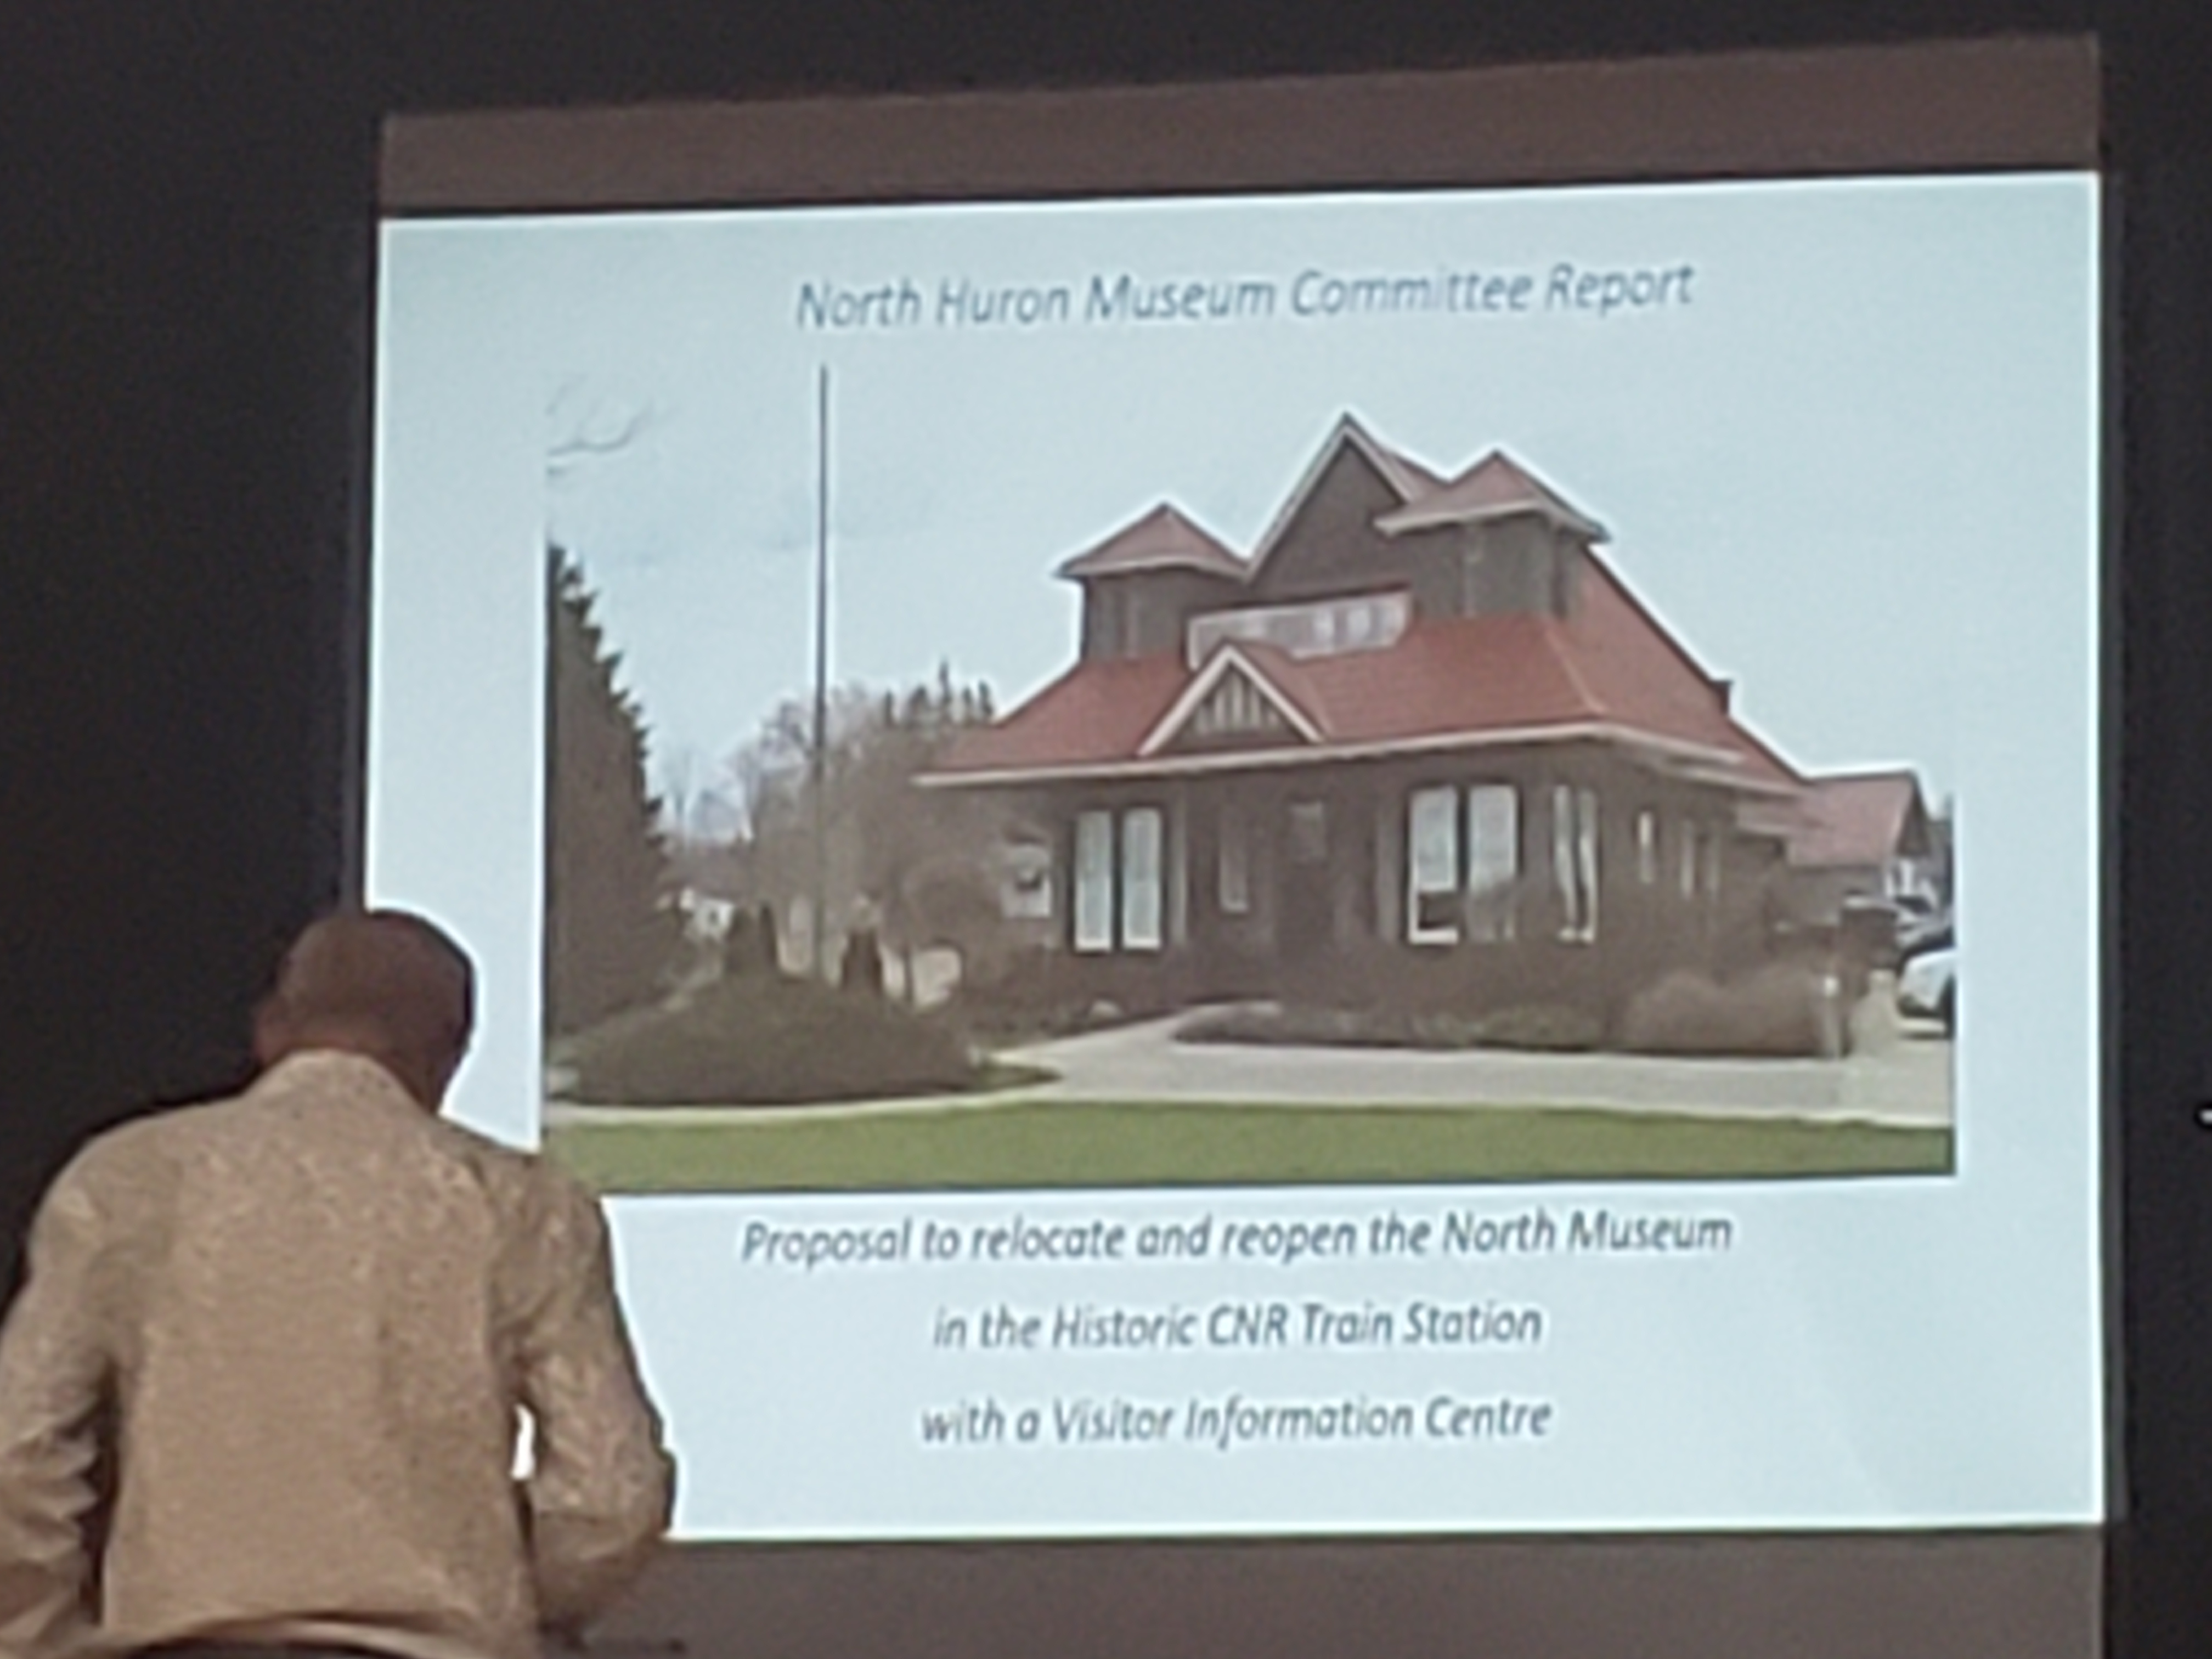 Plan presented to relocate North Huron Museum